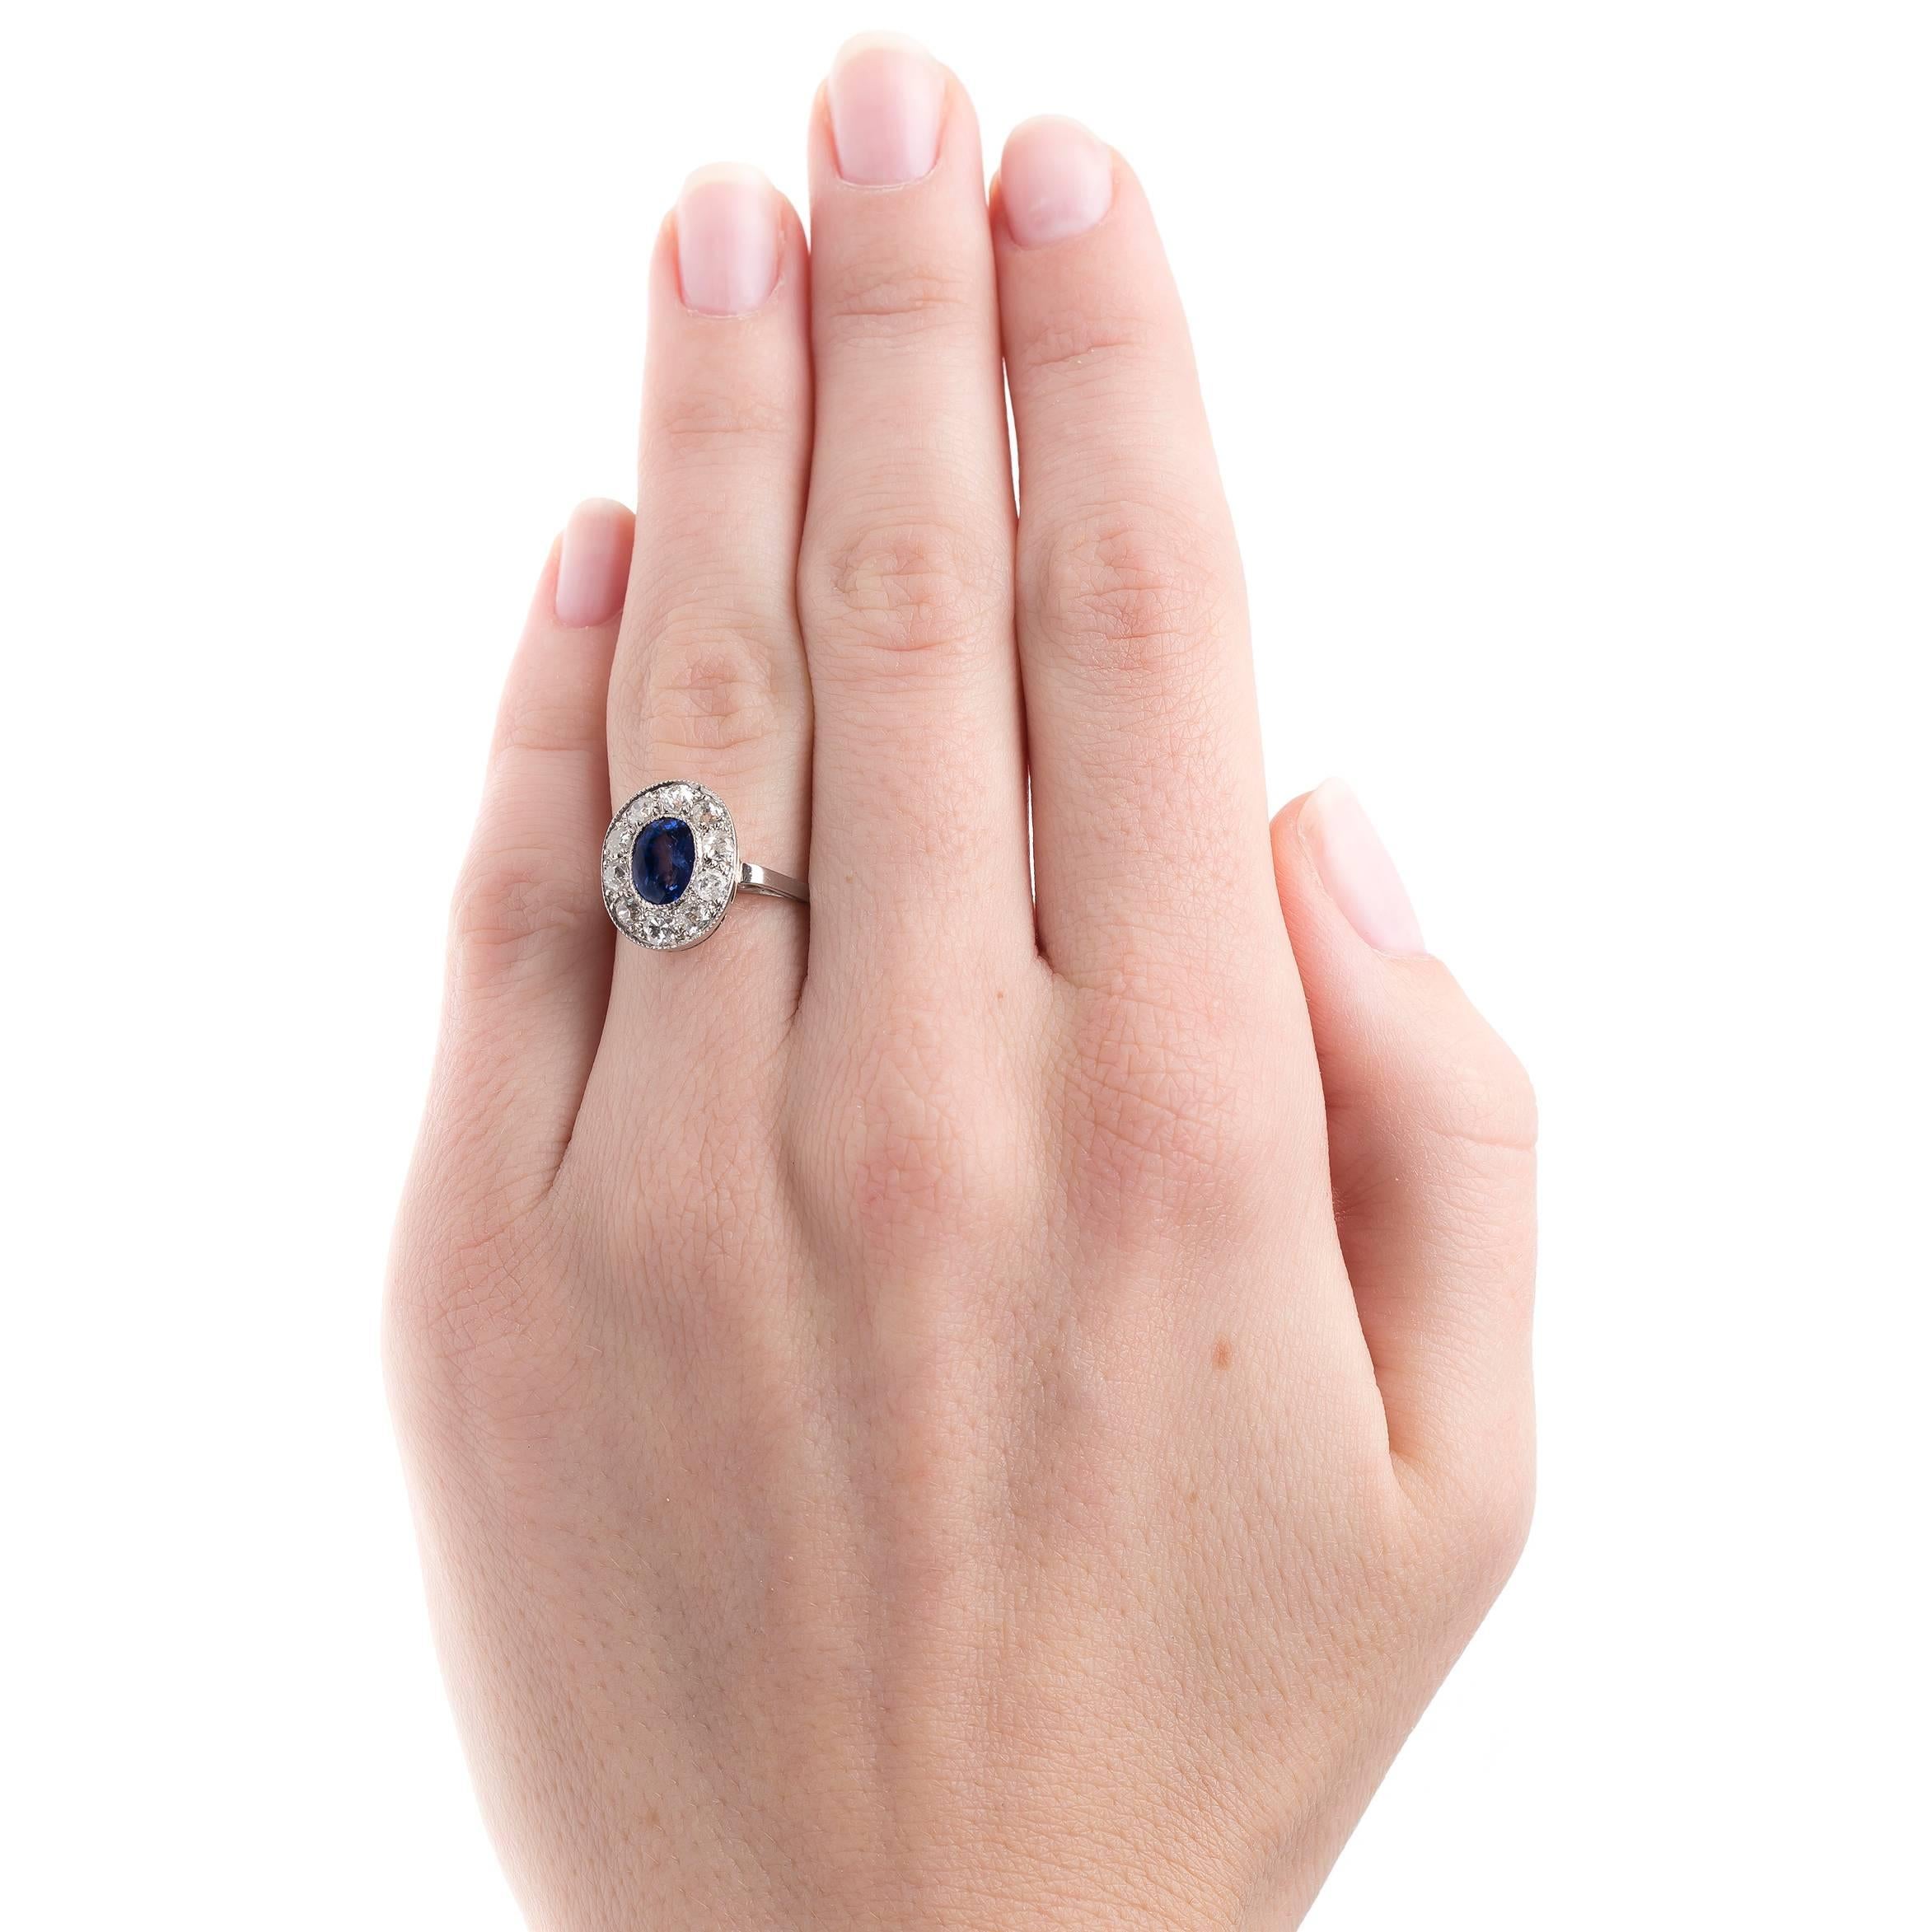 Alluring Art Deco Sapphire Diamond Gold Halo Engagement Ring In Excellent Condition For Sale In Los Angeles, CA